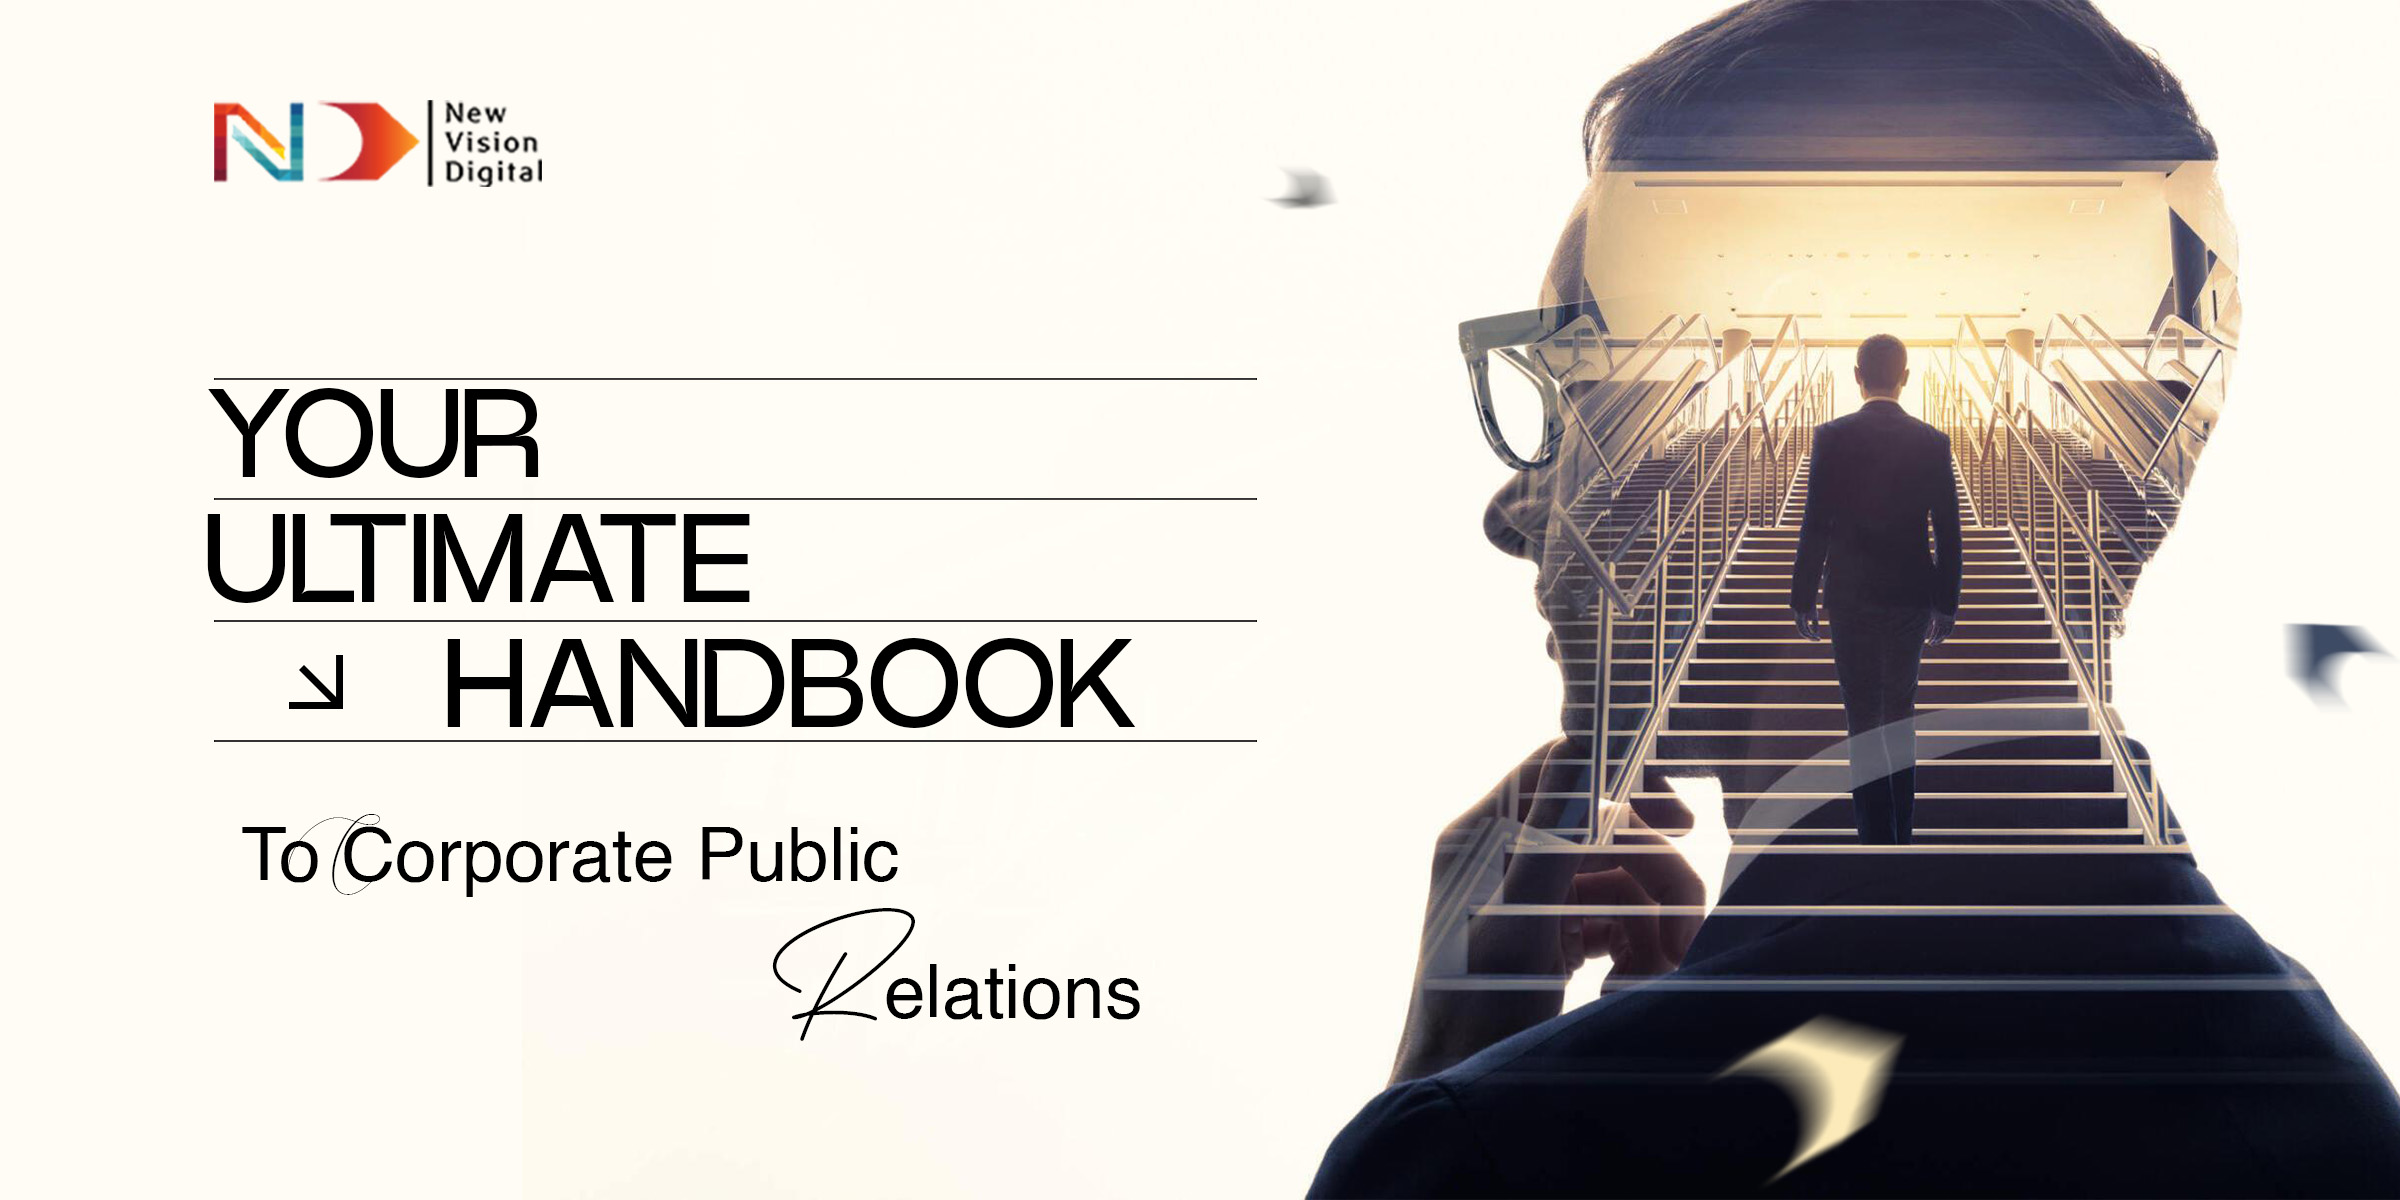 Your Ultimate Handbook To Corporate Public Relations